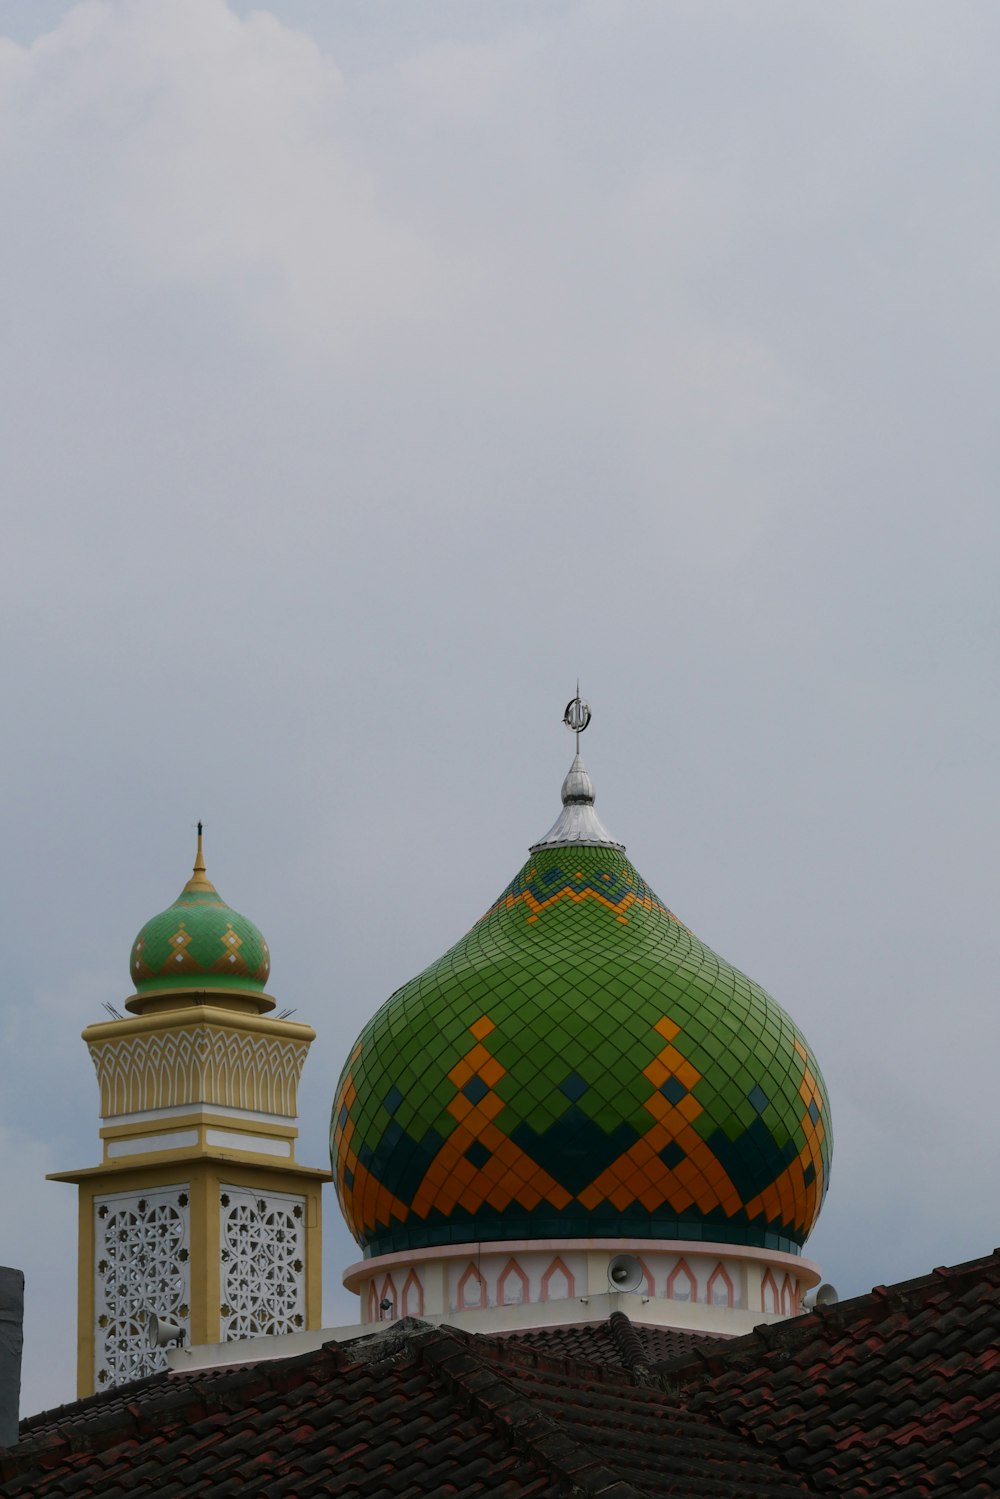 a green and yellow dome on top of a building